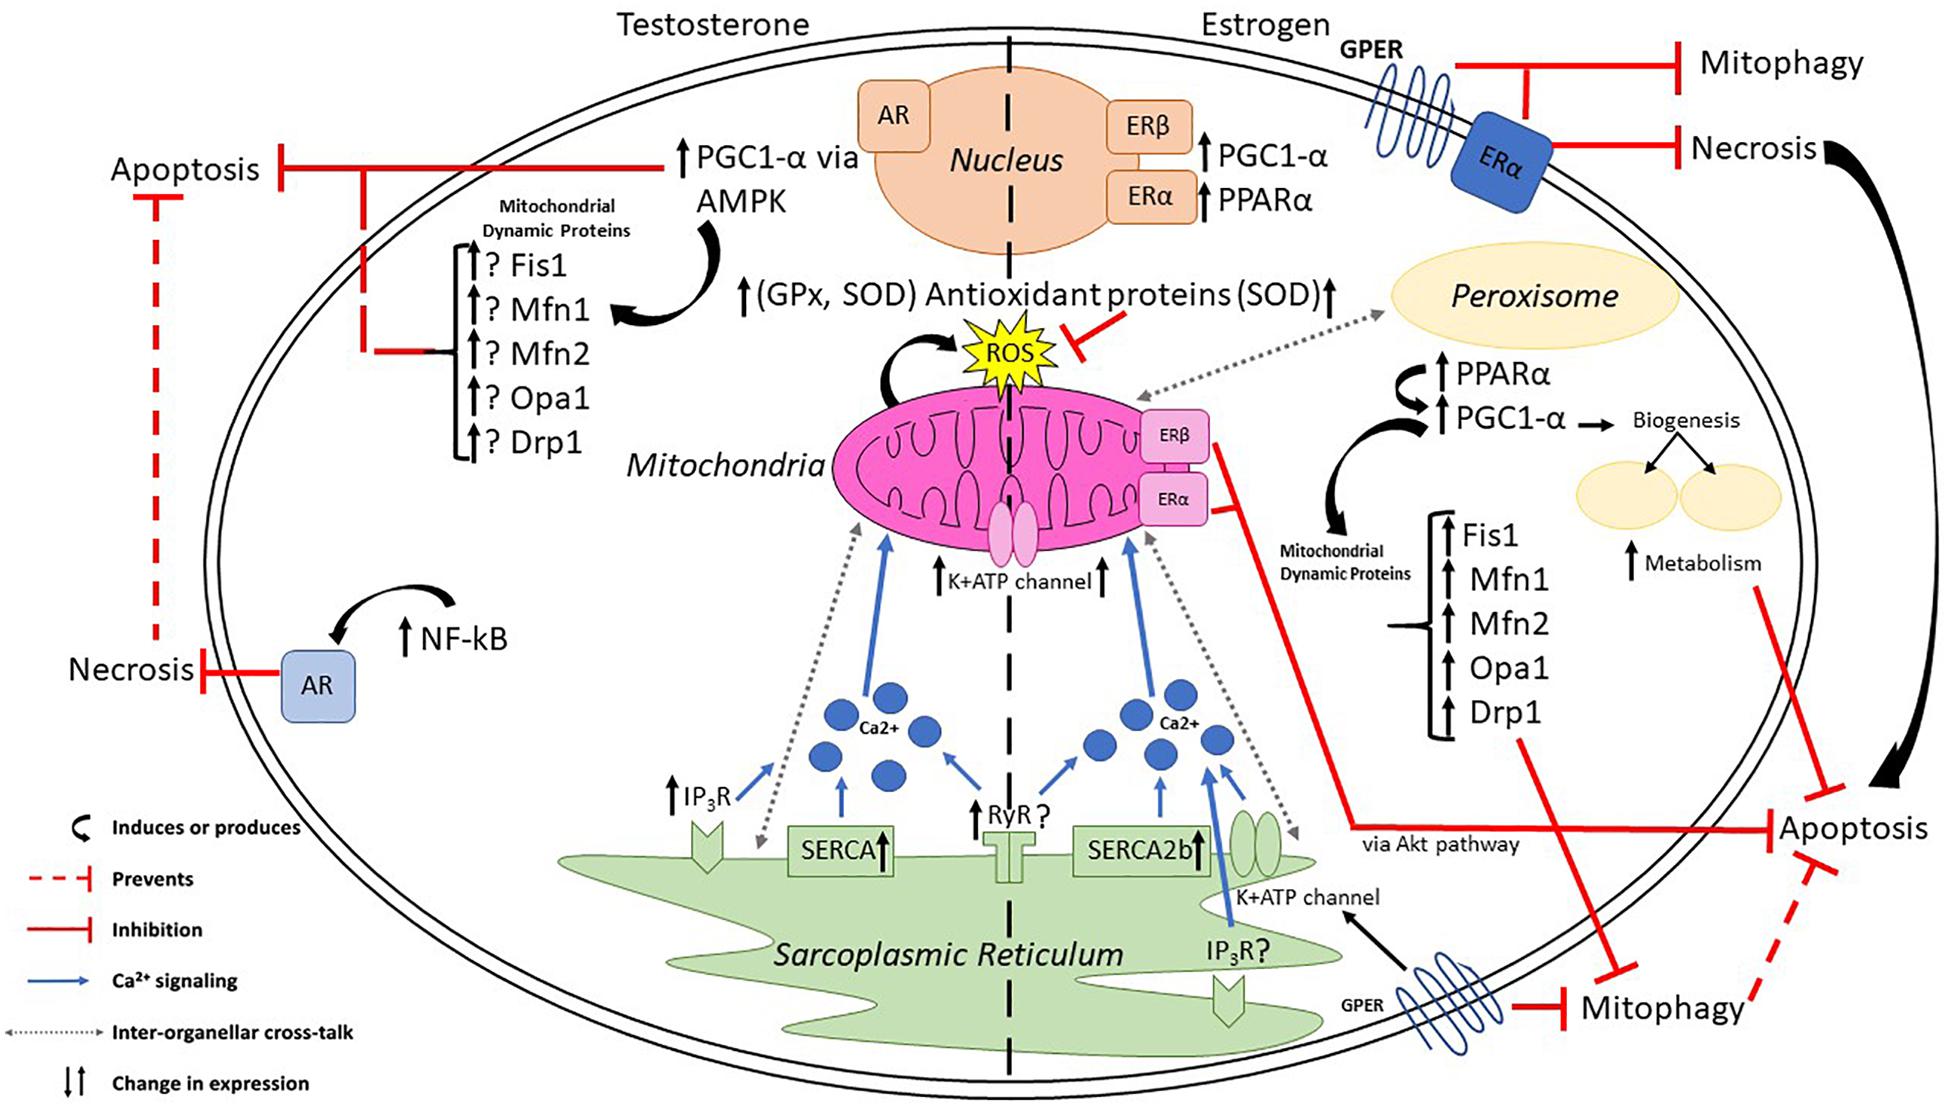 Frontiers Sex Hormone Regulation of Proteins Modulating Mitochondrial Metabolism, Dynamics and Inter-Organellar Cross Talk in Cardiovascular Disease